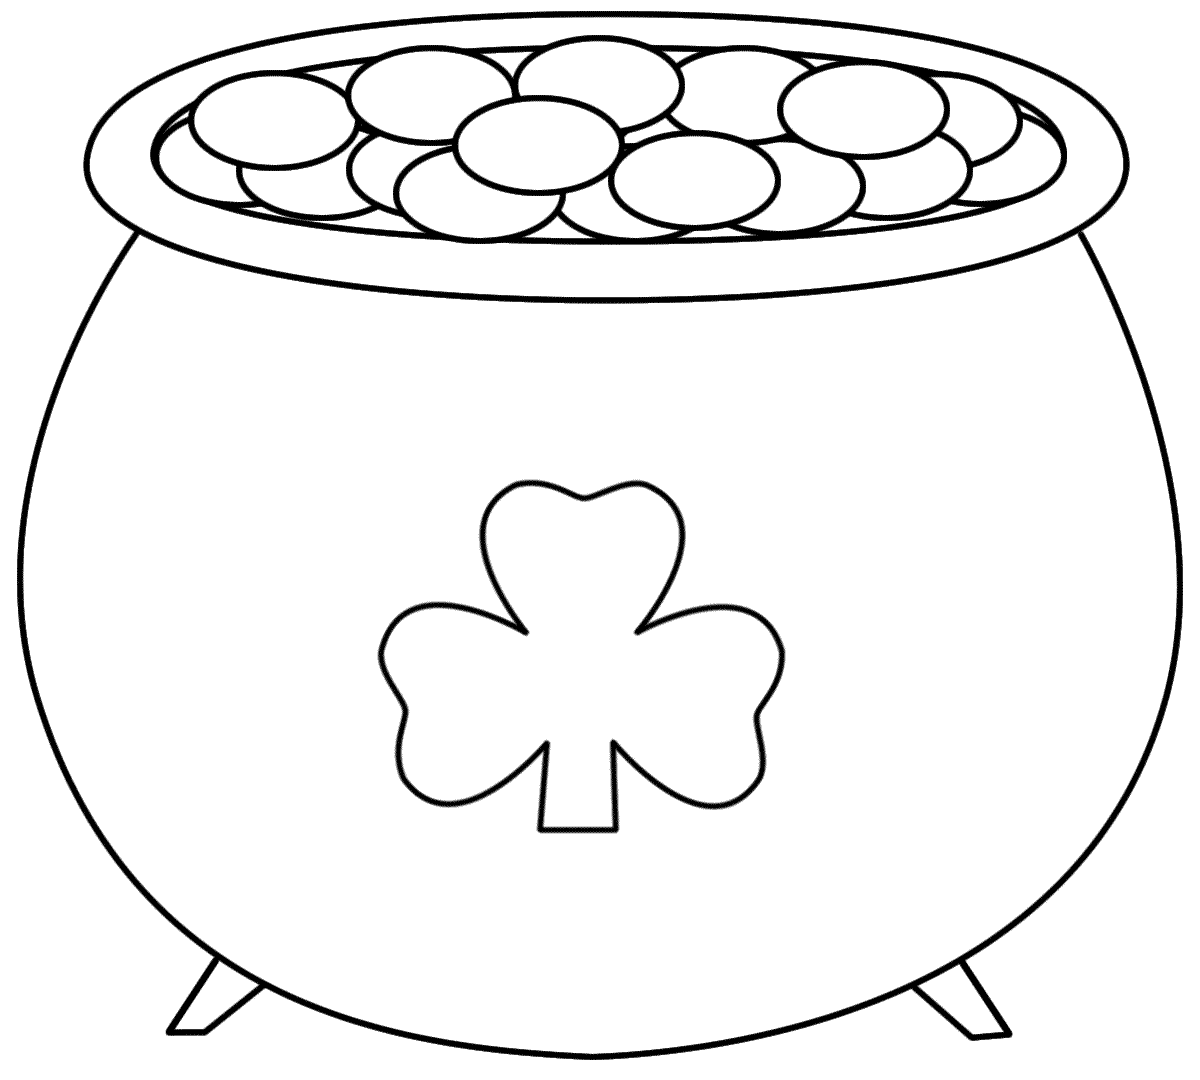 st patricks day coloring pages free to print Coloring4free